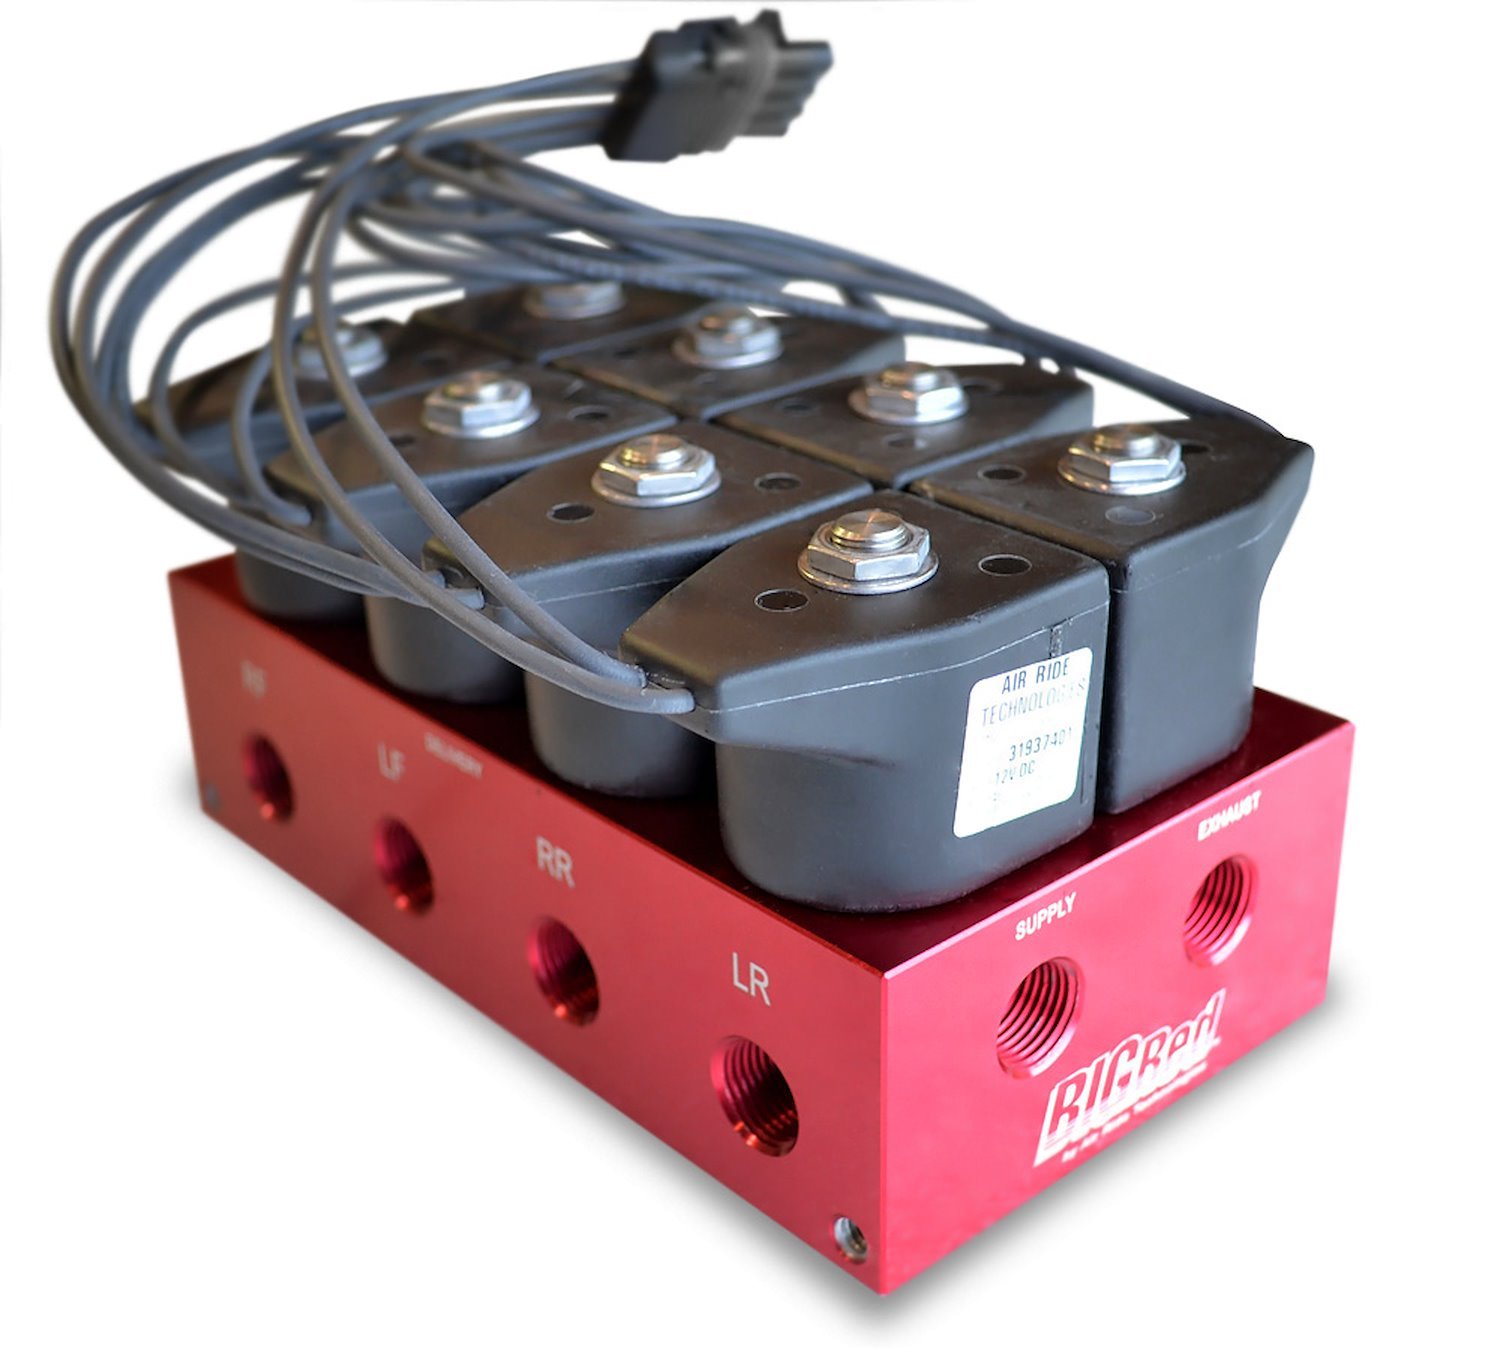 Air Valve Block. Big Red 4-Way with 3/8 NPT Ports. Includes O-Rings and Mounting Brackets. Fittings Sold Separately.